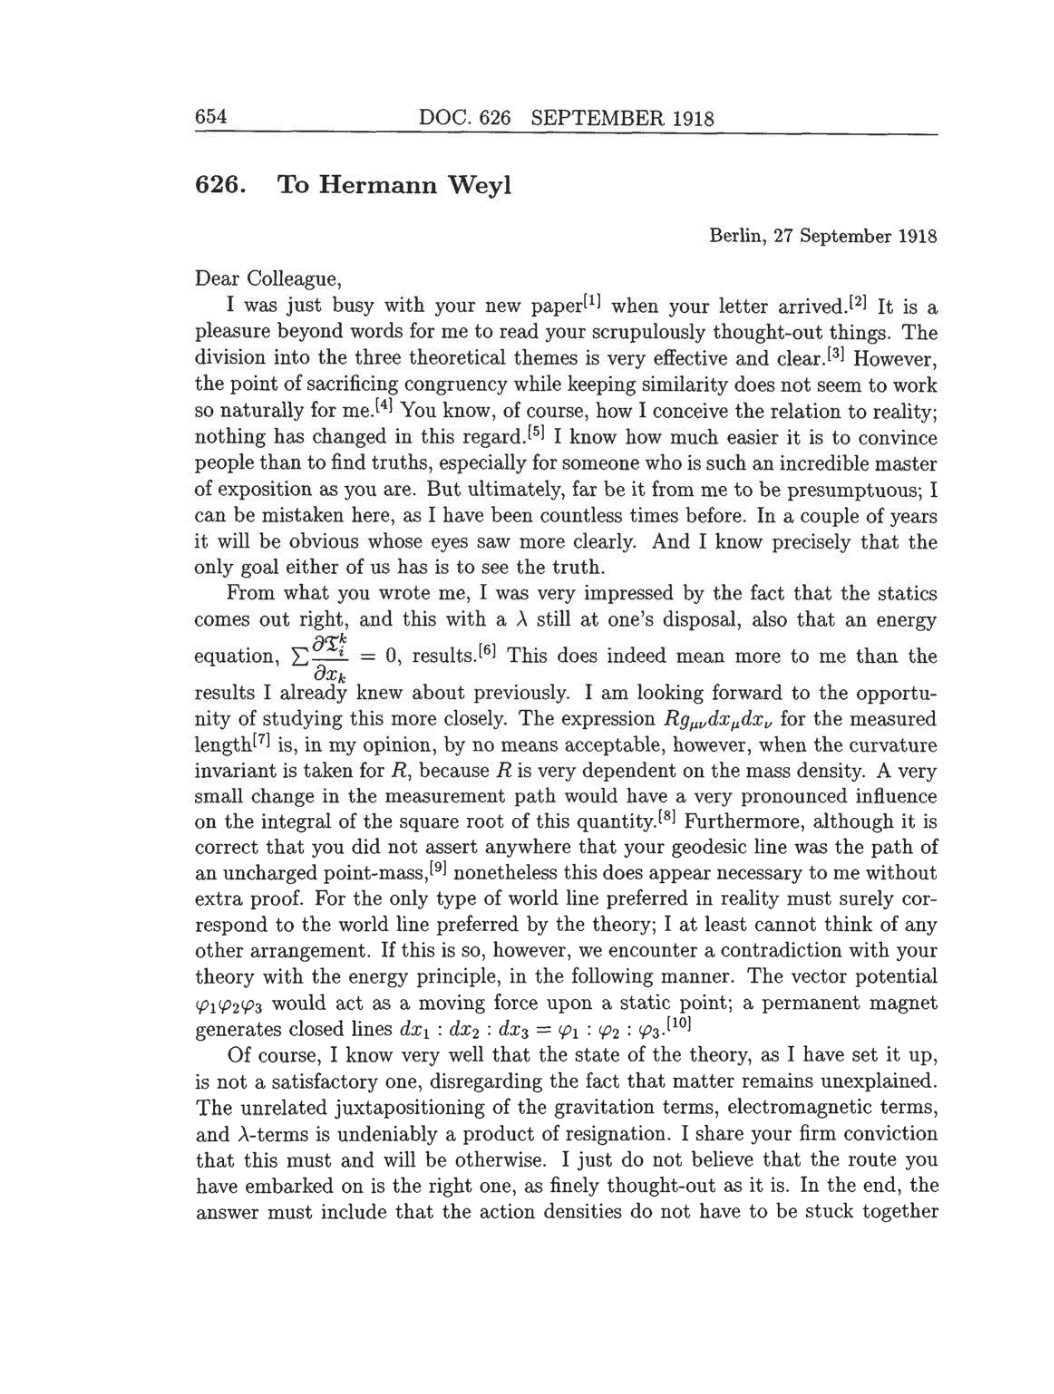 Volume 8: The Berlin Years: Correspondence, 1914-1918 (English translation supplement) page 654